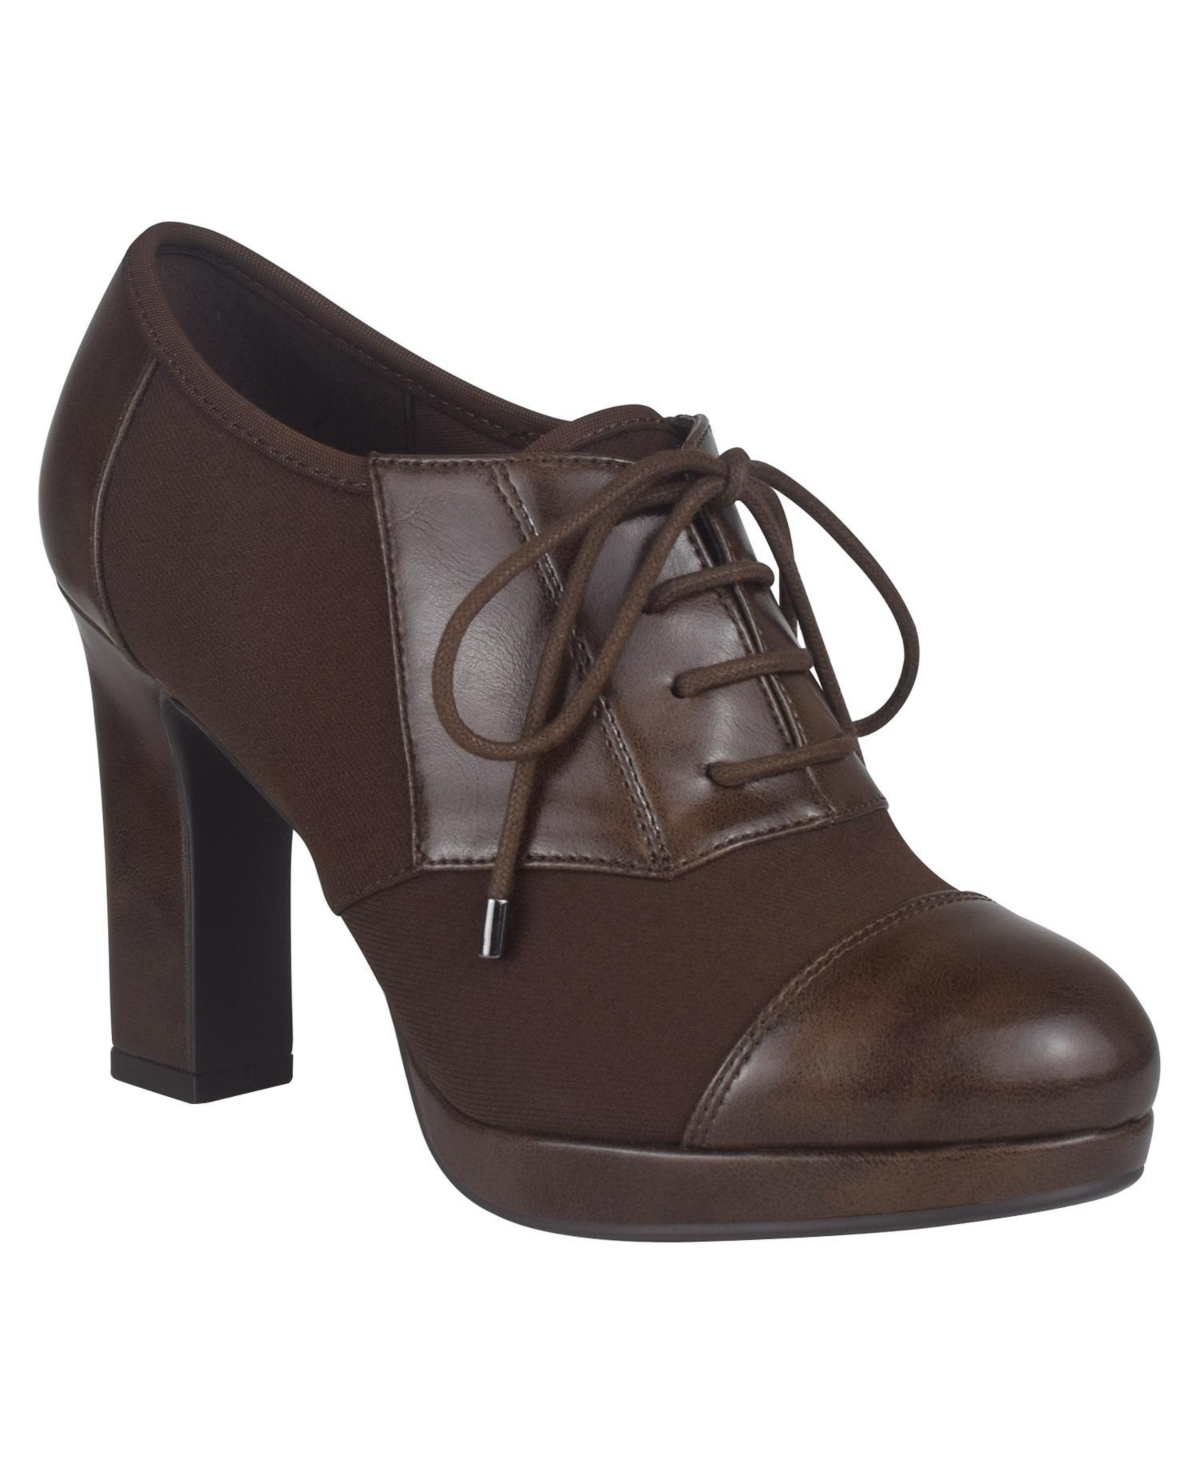 Women's Olsen Stretch Lace Up Oxford Heeled Shooties - Mink Brown